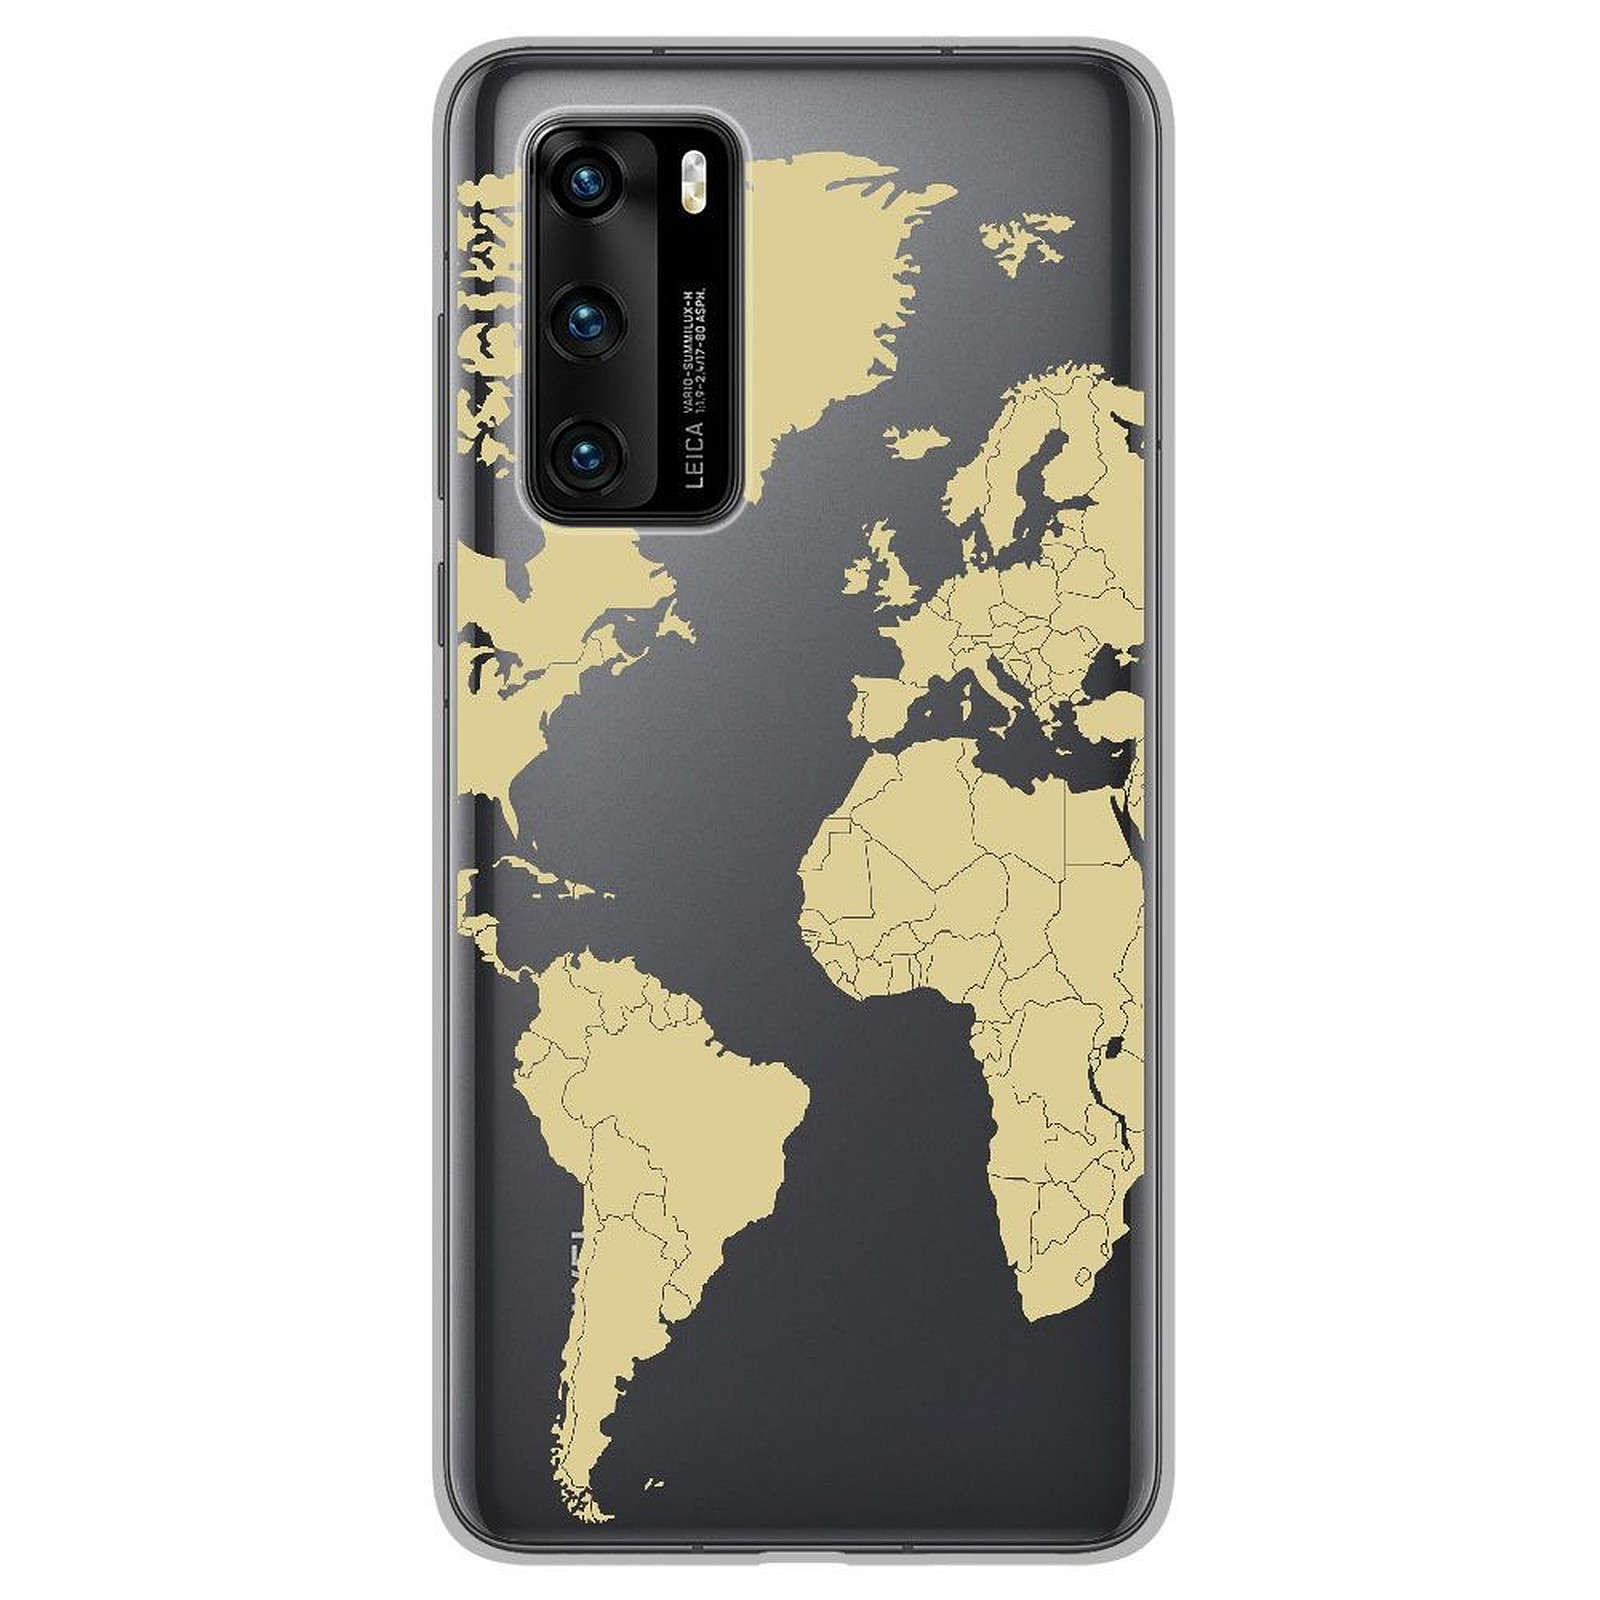 1001 Coques Coque silicone gel Huawei P40 motif Map beige - Coque telephone 1001Coques